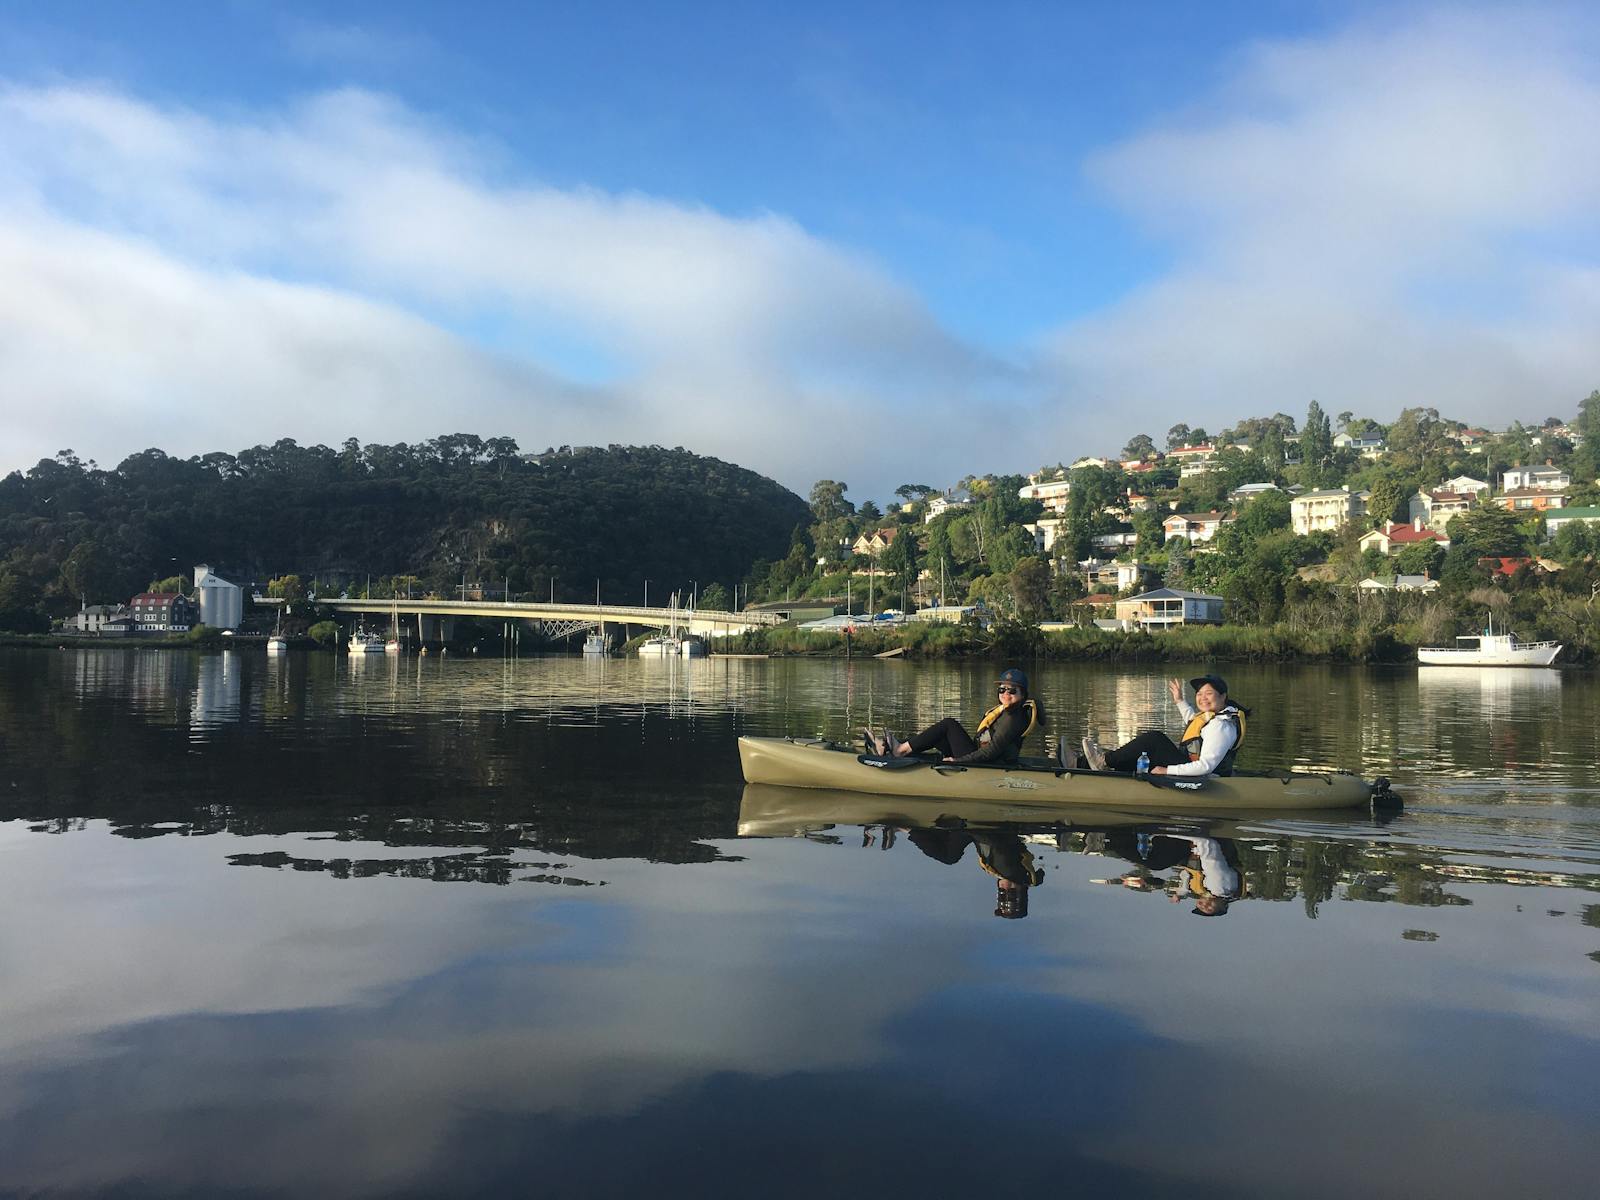 two people in a double pedal powered kayak on the Tamar river with reflections on the water